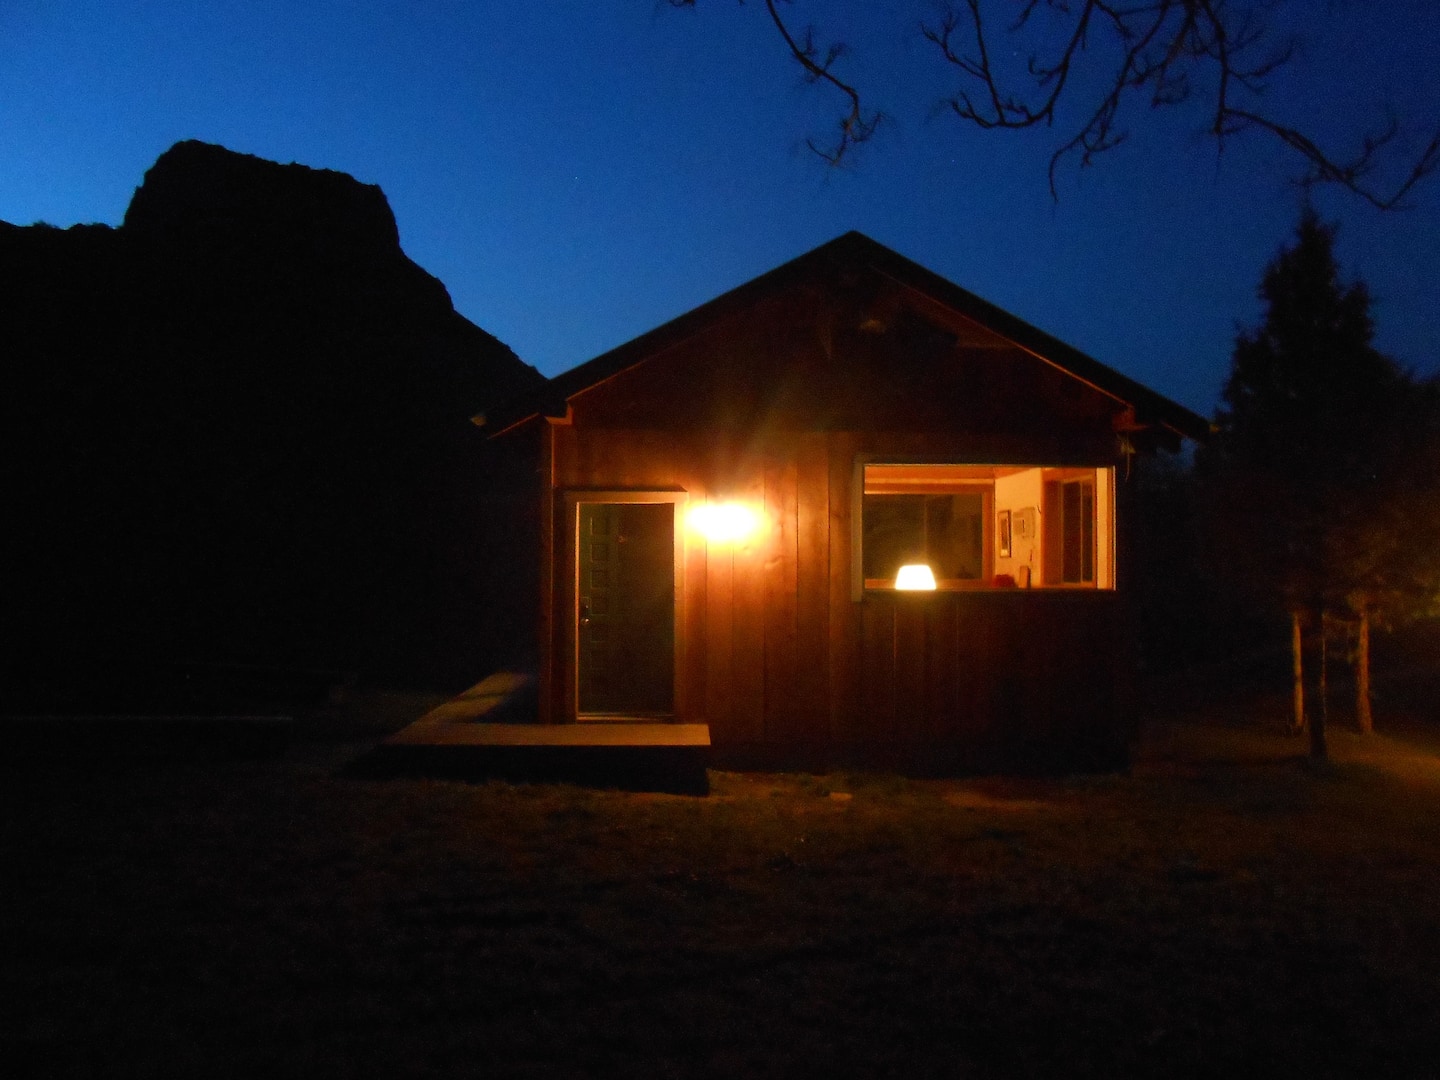 Cabin at dusk with Wedding Cake Mountain silhouetted in the background